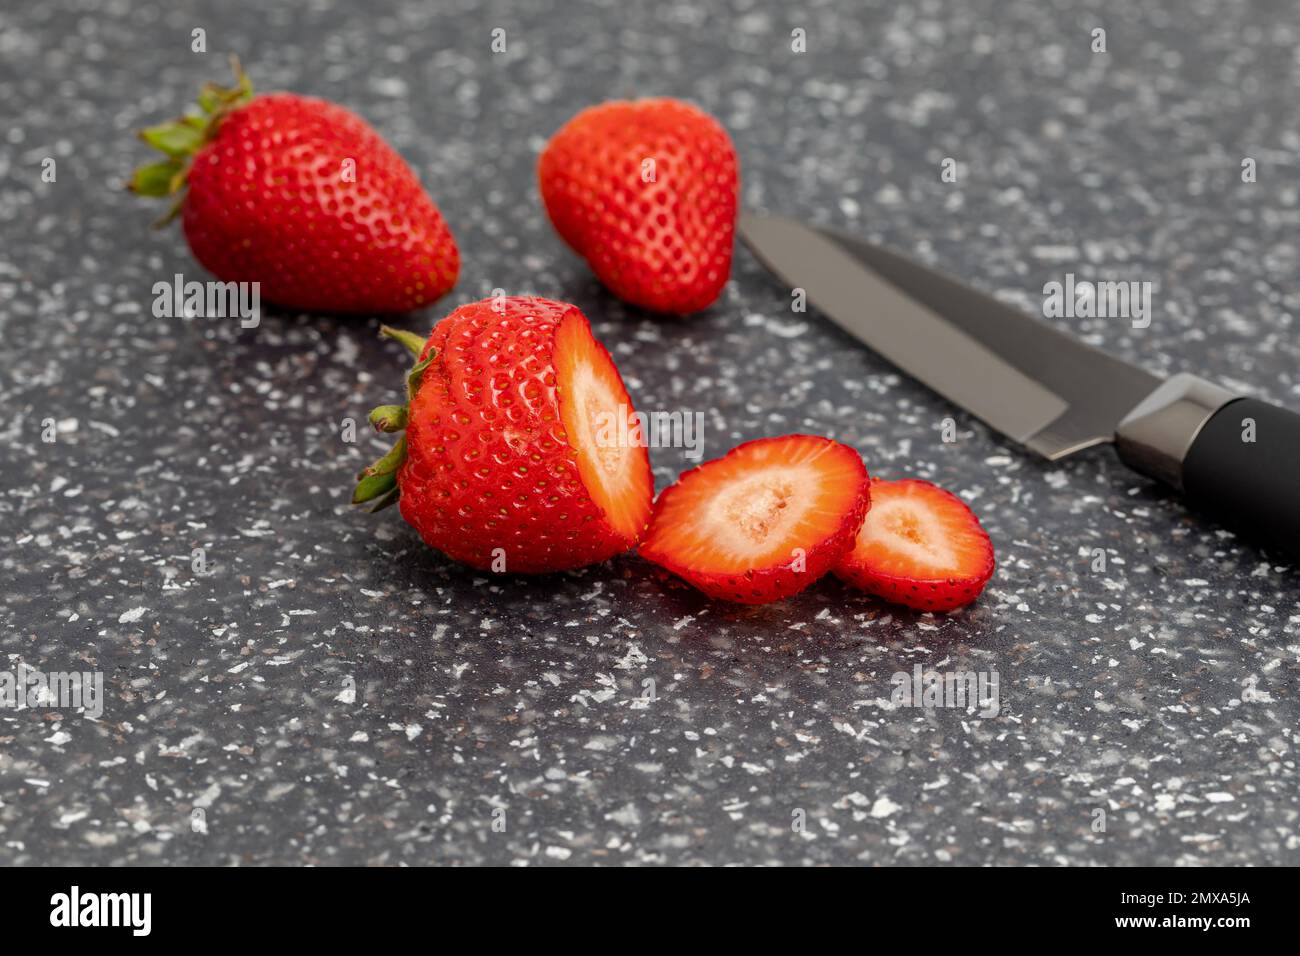 Fresh sliced strawberries. Organic fruit, healthy diet and nutrition concept. Stock Photo